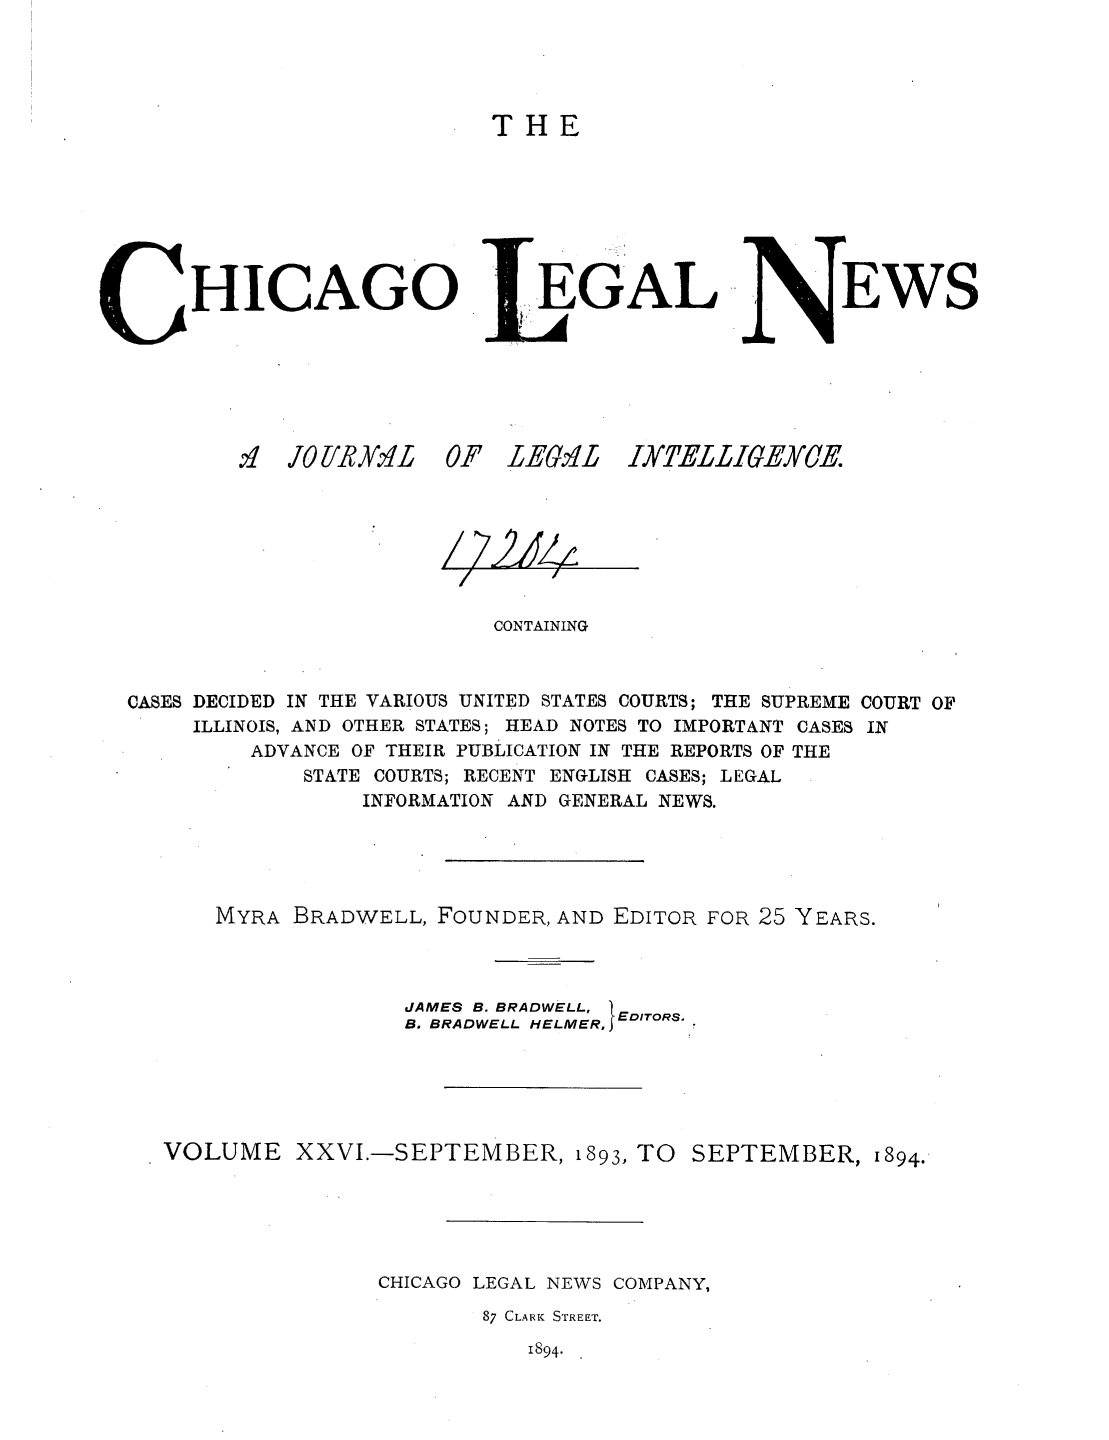 handle is hein.journals/chiclene26 and id is 1 raw text is: THEHICAGOv 1 JOVRY.MLGALOF LEGr.1LEWSCONTAININGCASES DECIDED IN THE VARIOUS UNITED STATES COURTS; THE SUPREME COURT OFILLINOIS, AND OTHER STATES; HEAD NOTES TO IMPORTANT CASES INADVANCE OF THEIR PUBLICATION IN THE REPORTS OF THESTATE COURTS; RECENT ENGLISH CASES; LEGALINFORMATION AND GENERAL NEWS.MYRA BRADWELL, FOUNDER, AND EDITOR FOR 25 YEARS.JAMES B. BRADWELL, B. BRADWELL HELMER, EDITORS.VOLUME XXVI.-SEPTEMBER, 1893, TO SEPTEMBER, 1894.CHICAGO LEGAL NEWS COMPANY,87 CLARK STREET.1894.IXTELLIEYCE./ 22&4